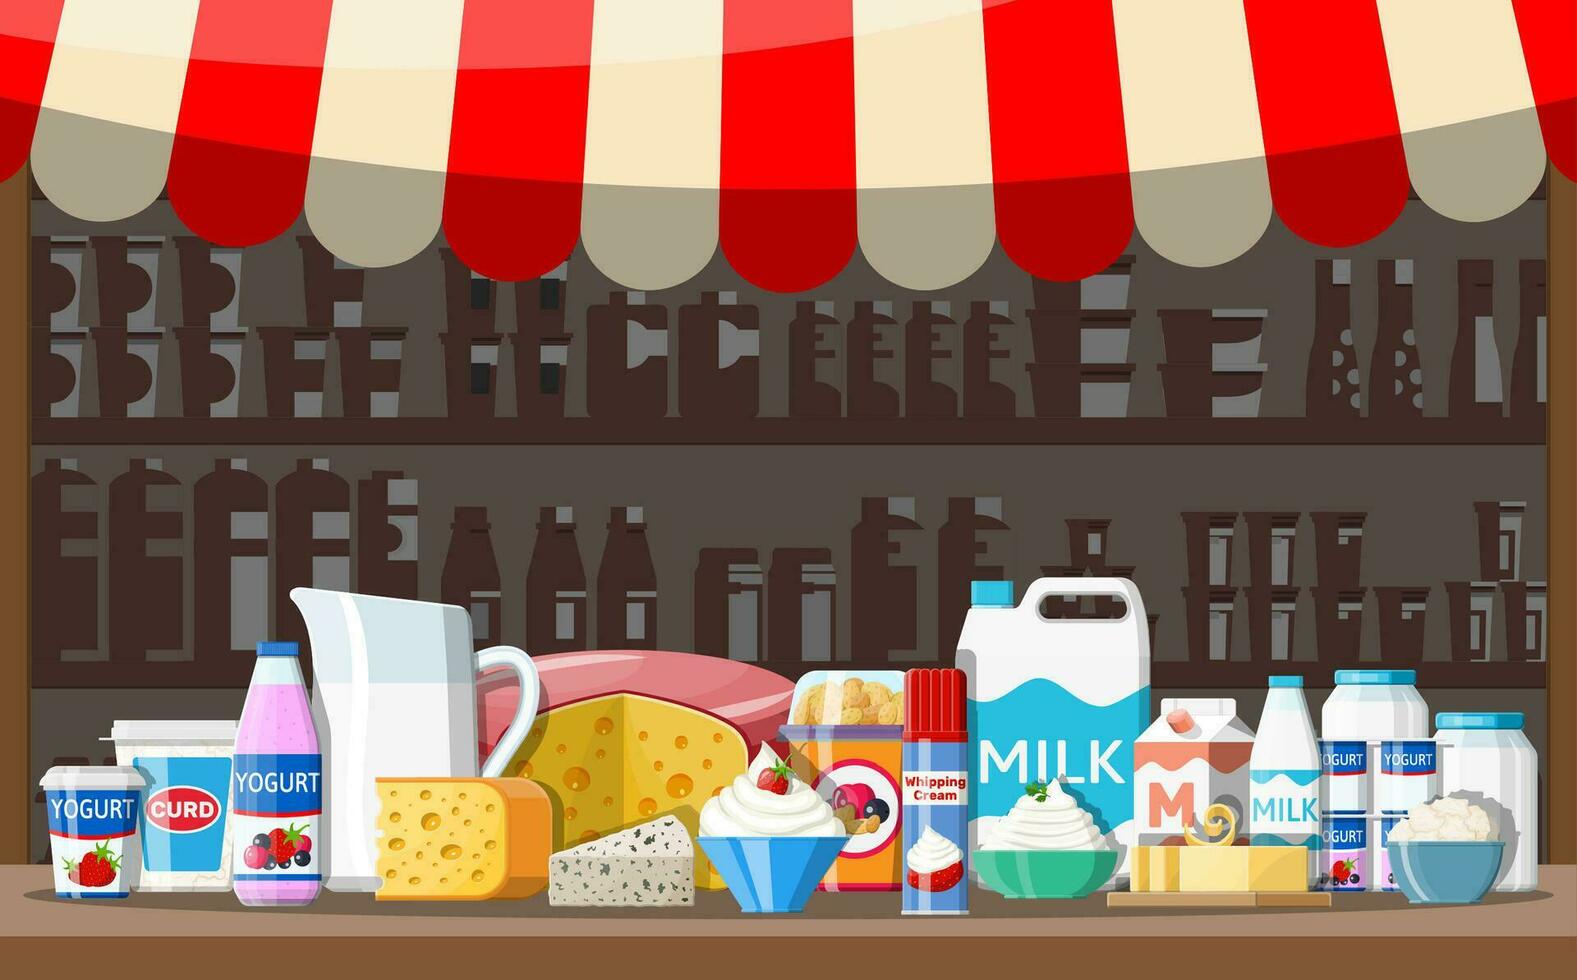 Milk street market store stall. Farmer shop or showcase counter. Dairy products set collection of food. Milk cheese yogurt butter sour cream cottage cream farm products. Vector illustration flat style